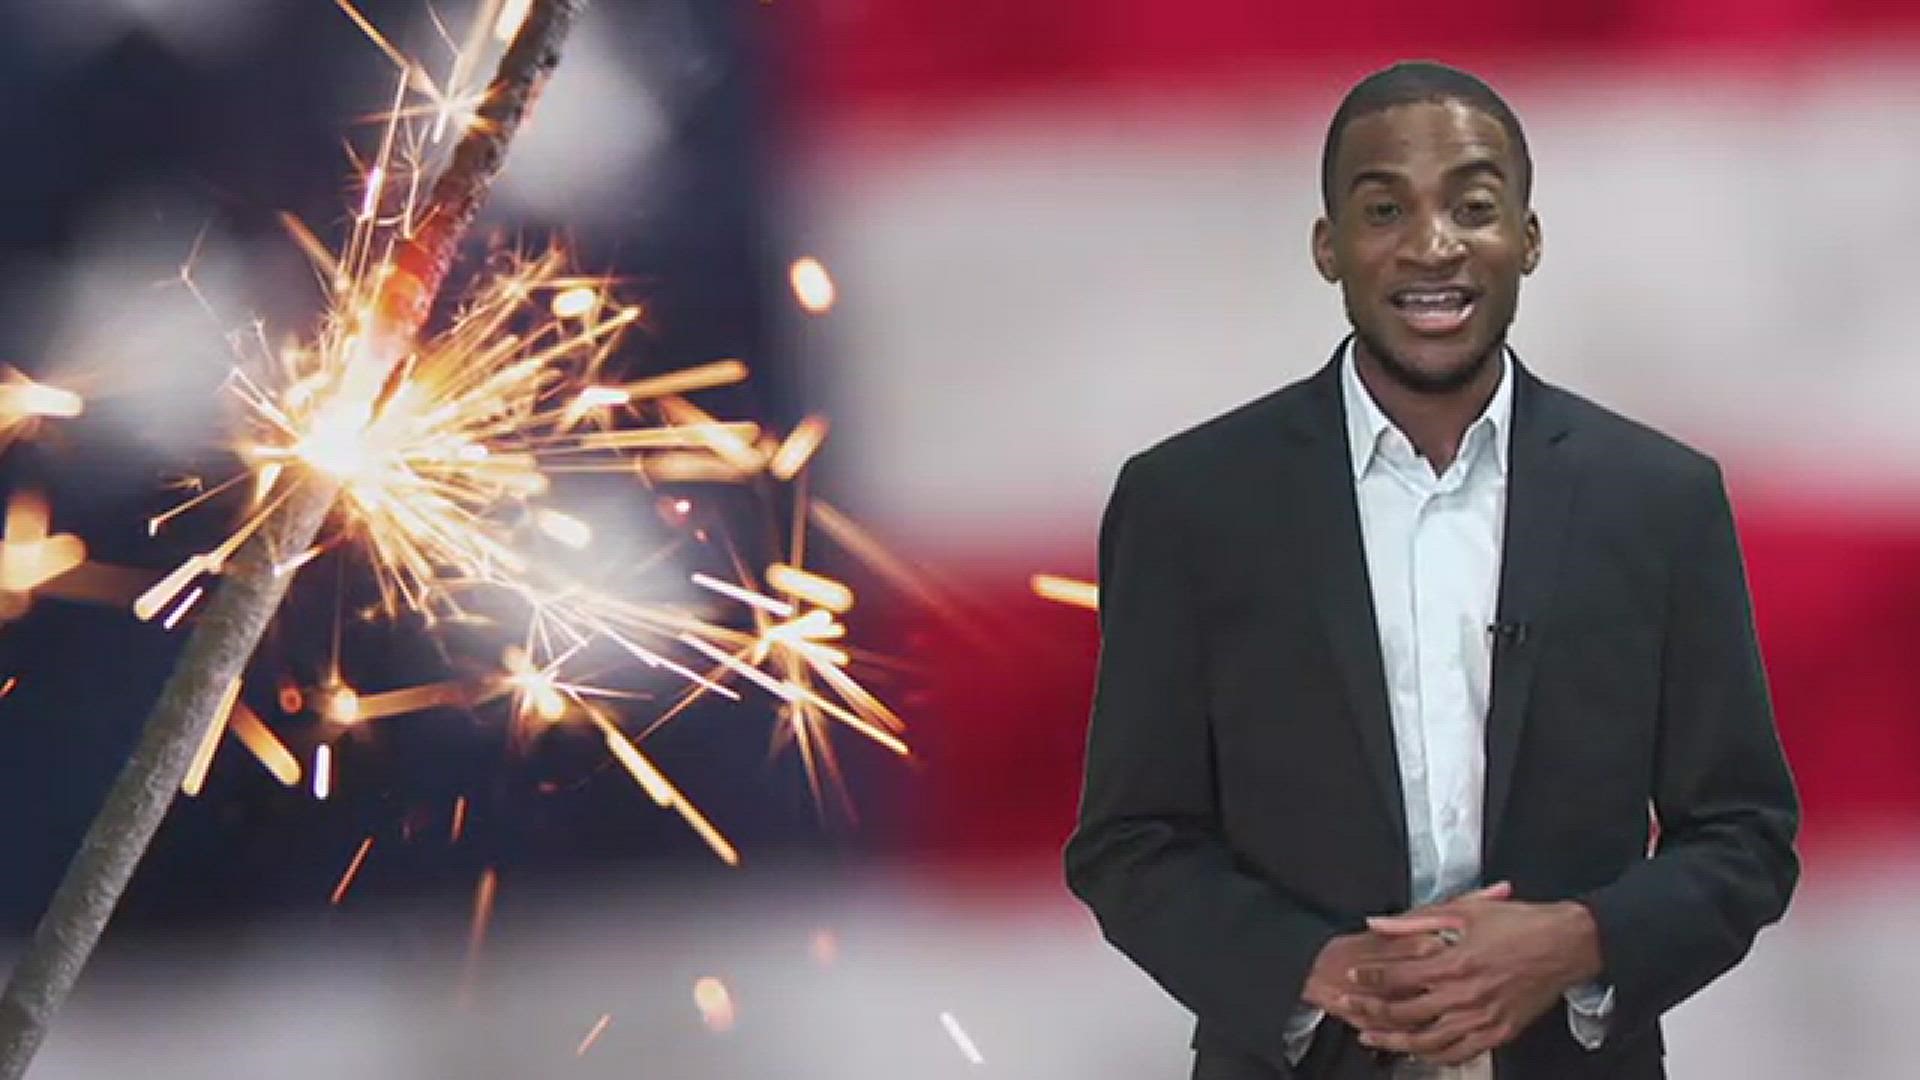 WFMY News 2's Terrence Jefferies has a list of Independence Day events that are fun for the whole family!